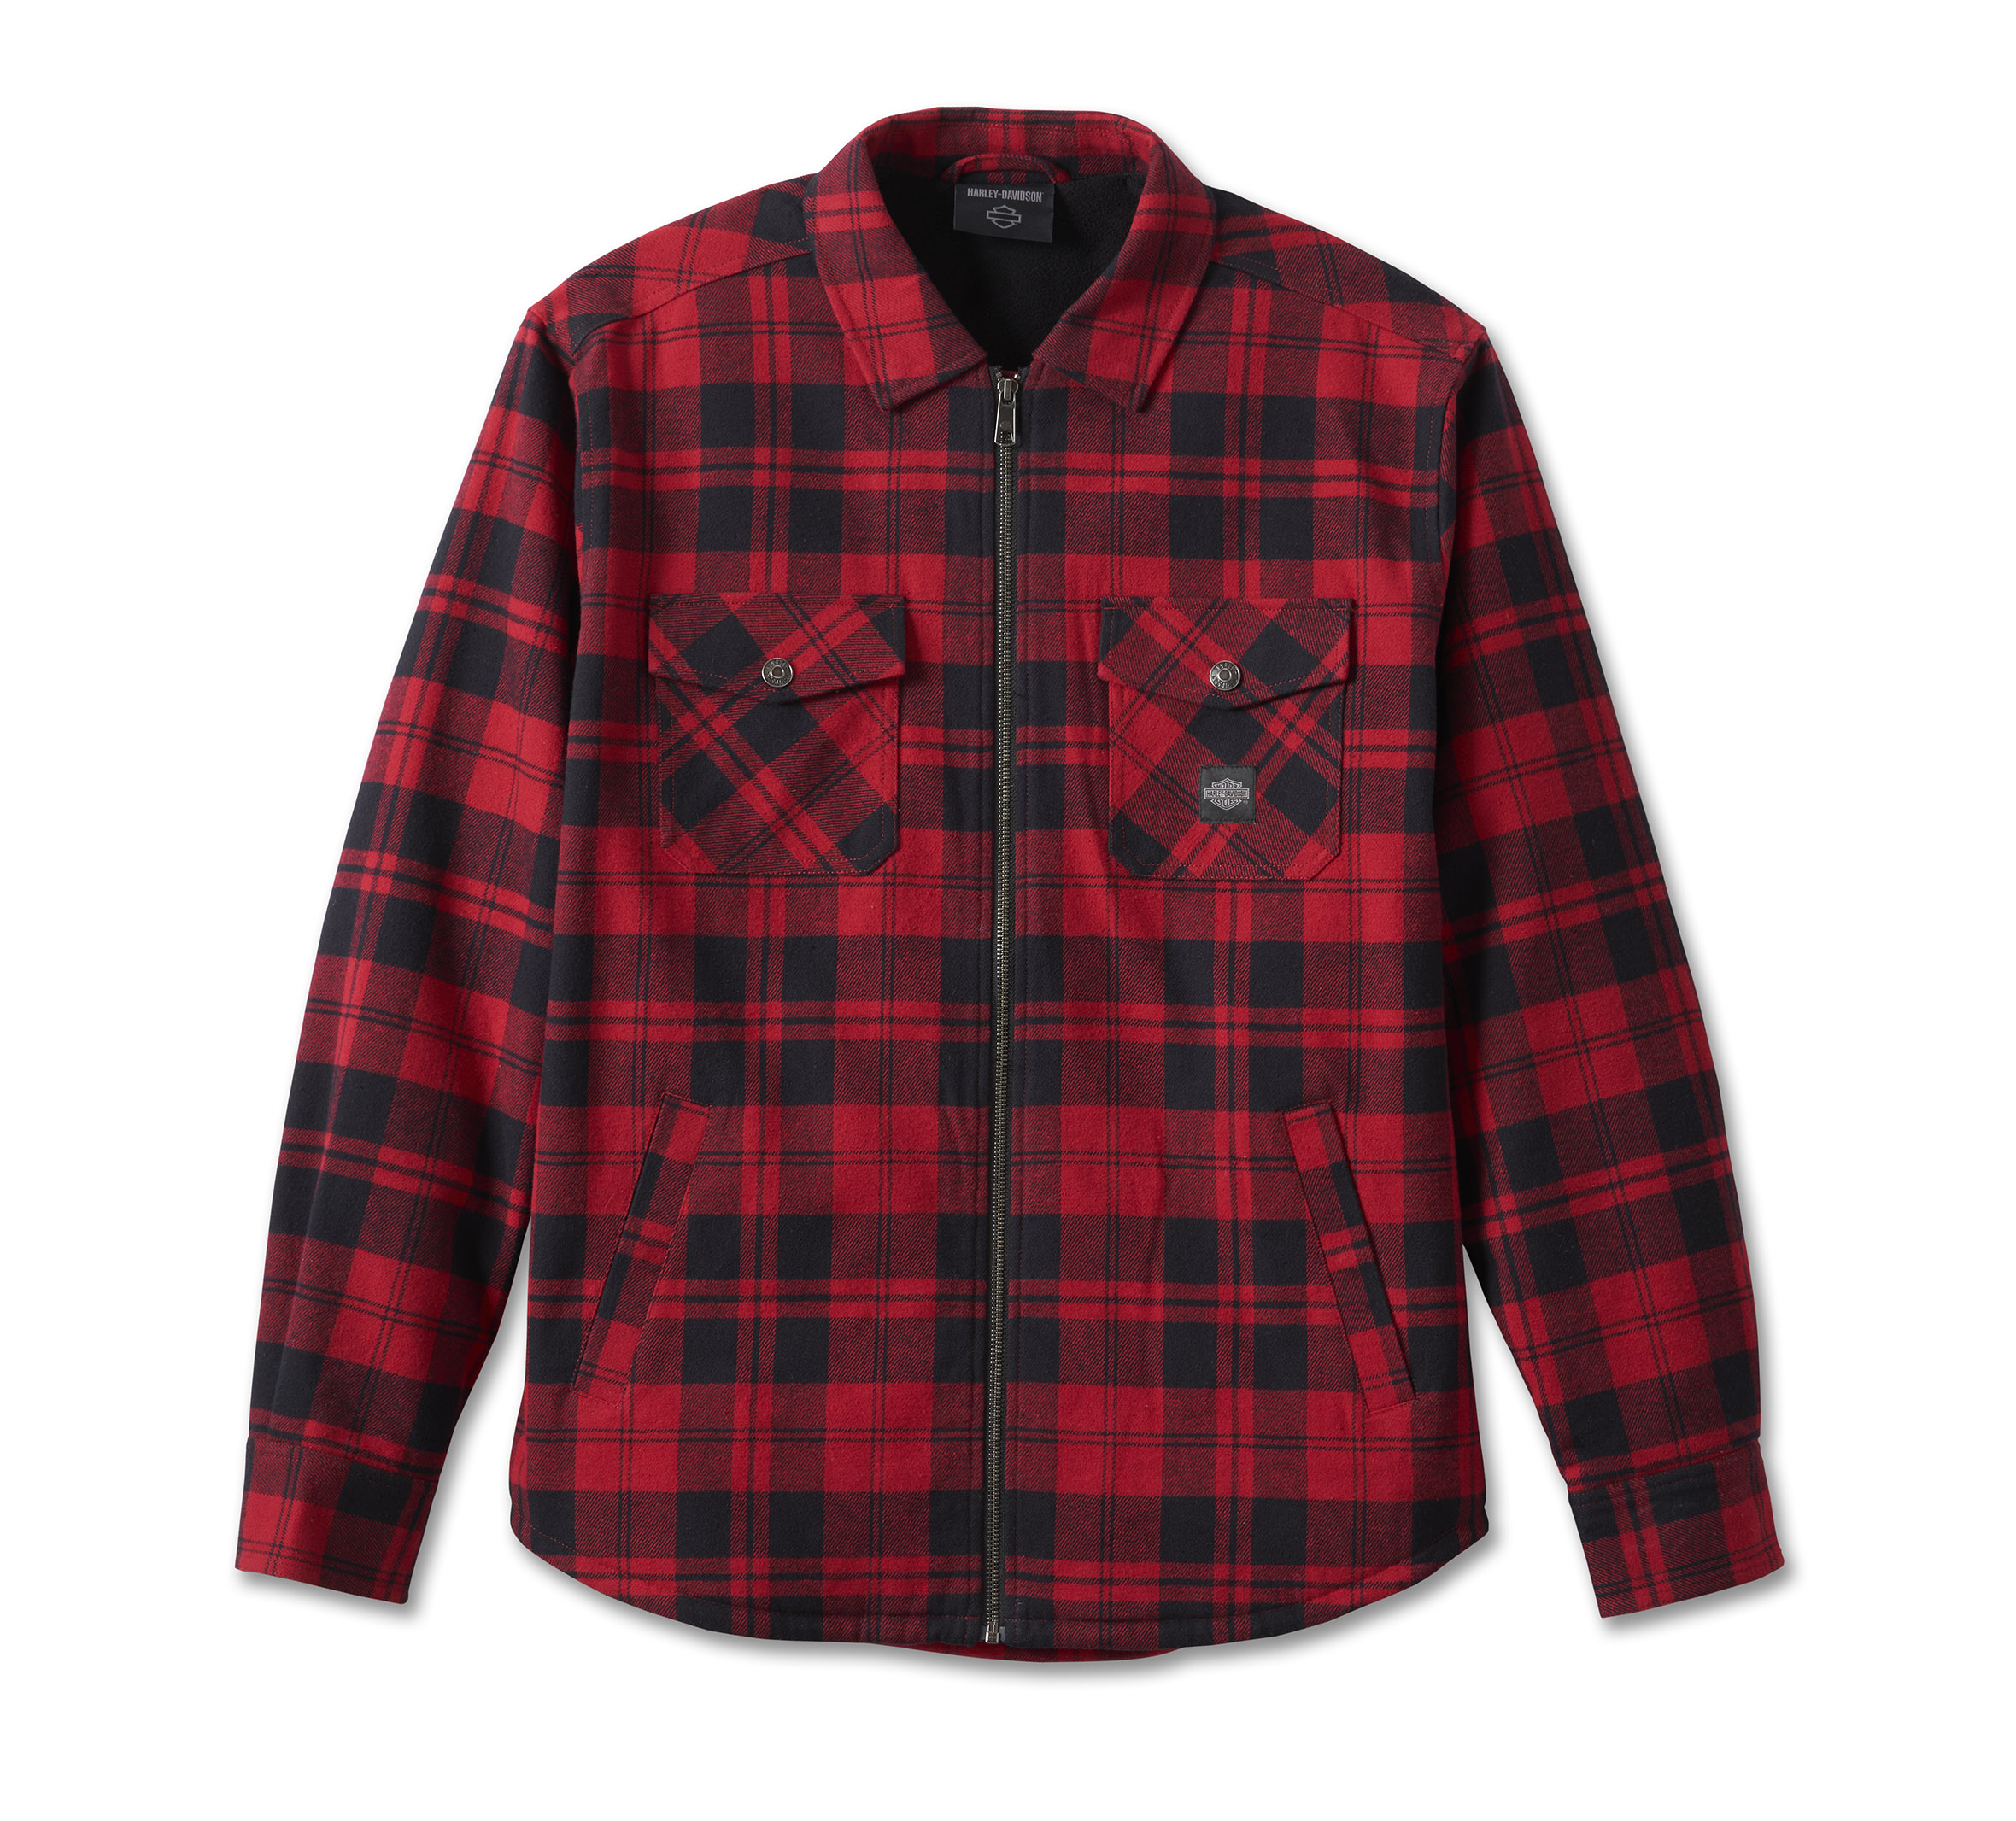 Buy PLAID PRINT RED-BLACK OVERSIZED SHIRT for Women Online in India